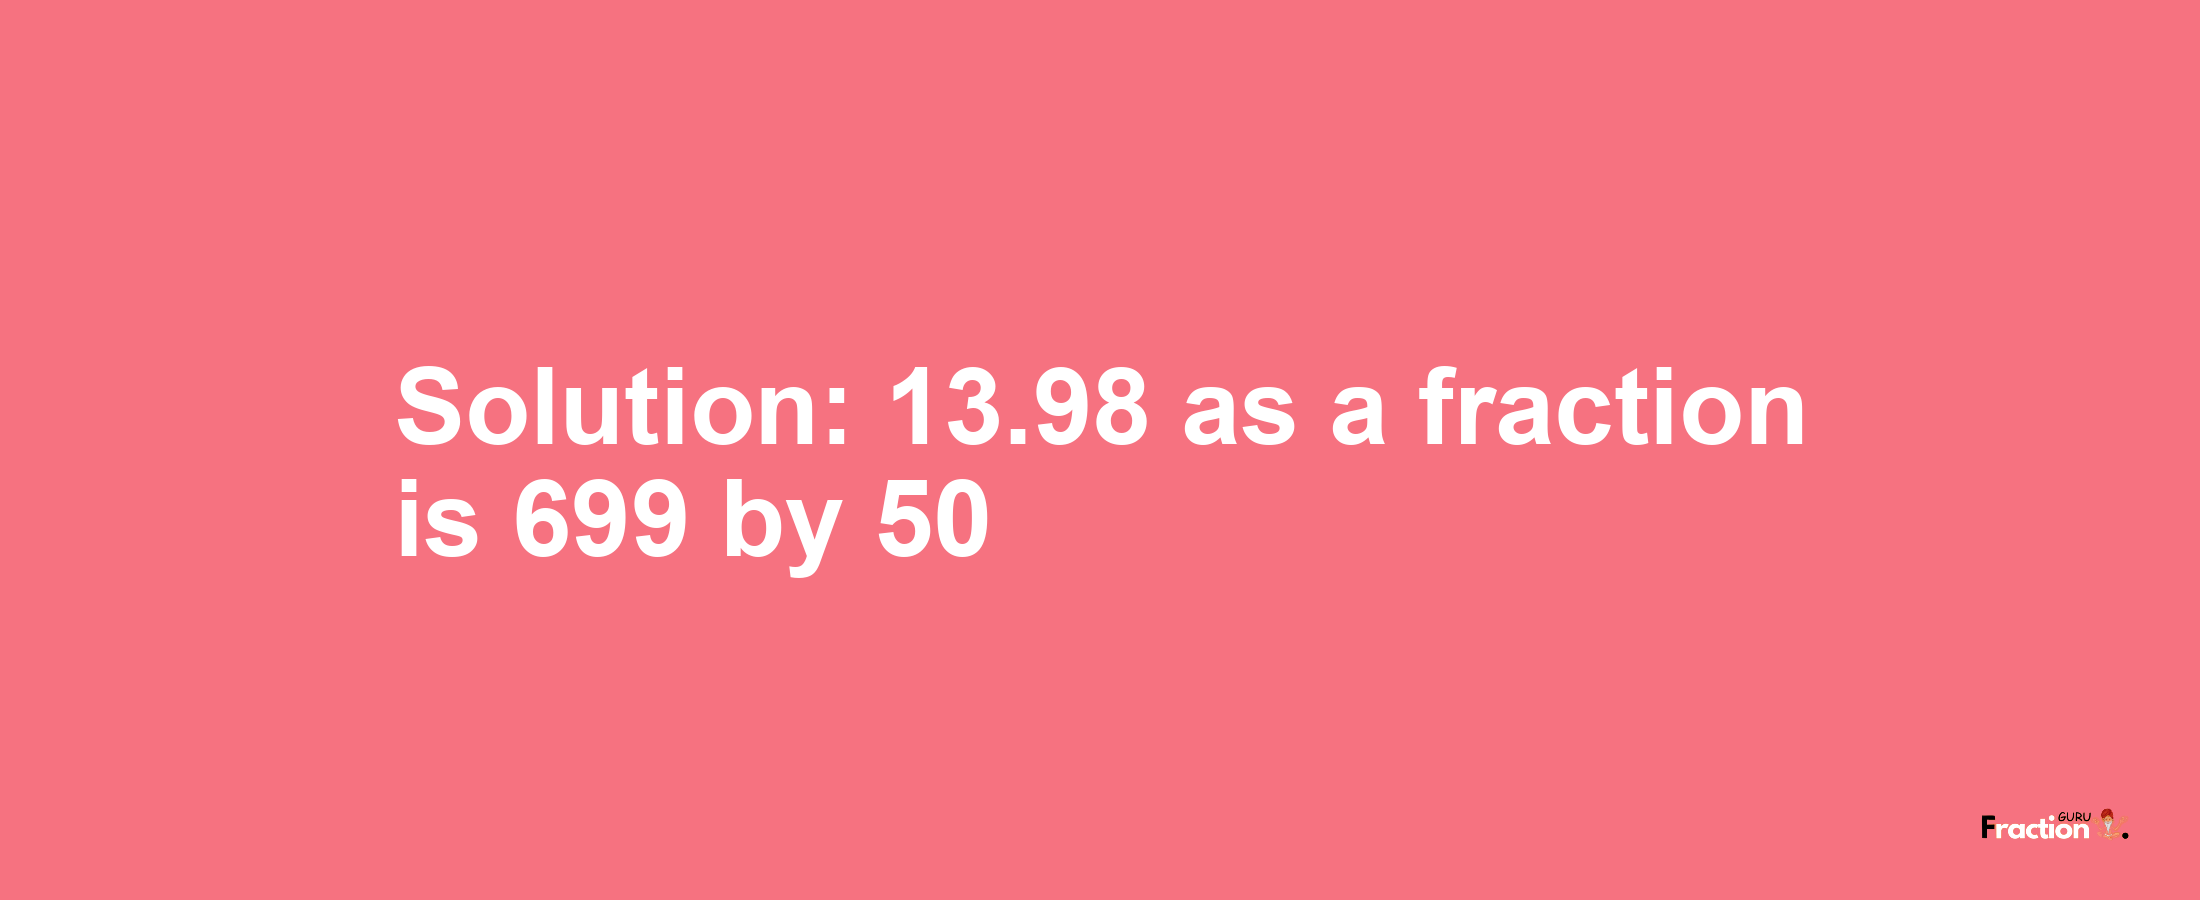 Solution:13.98 as a fraction is 699/50